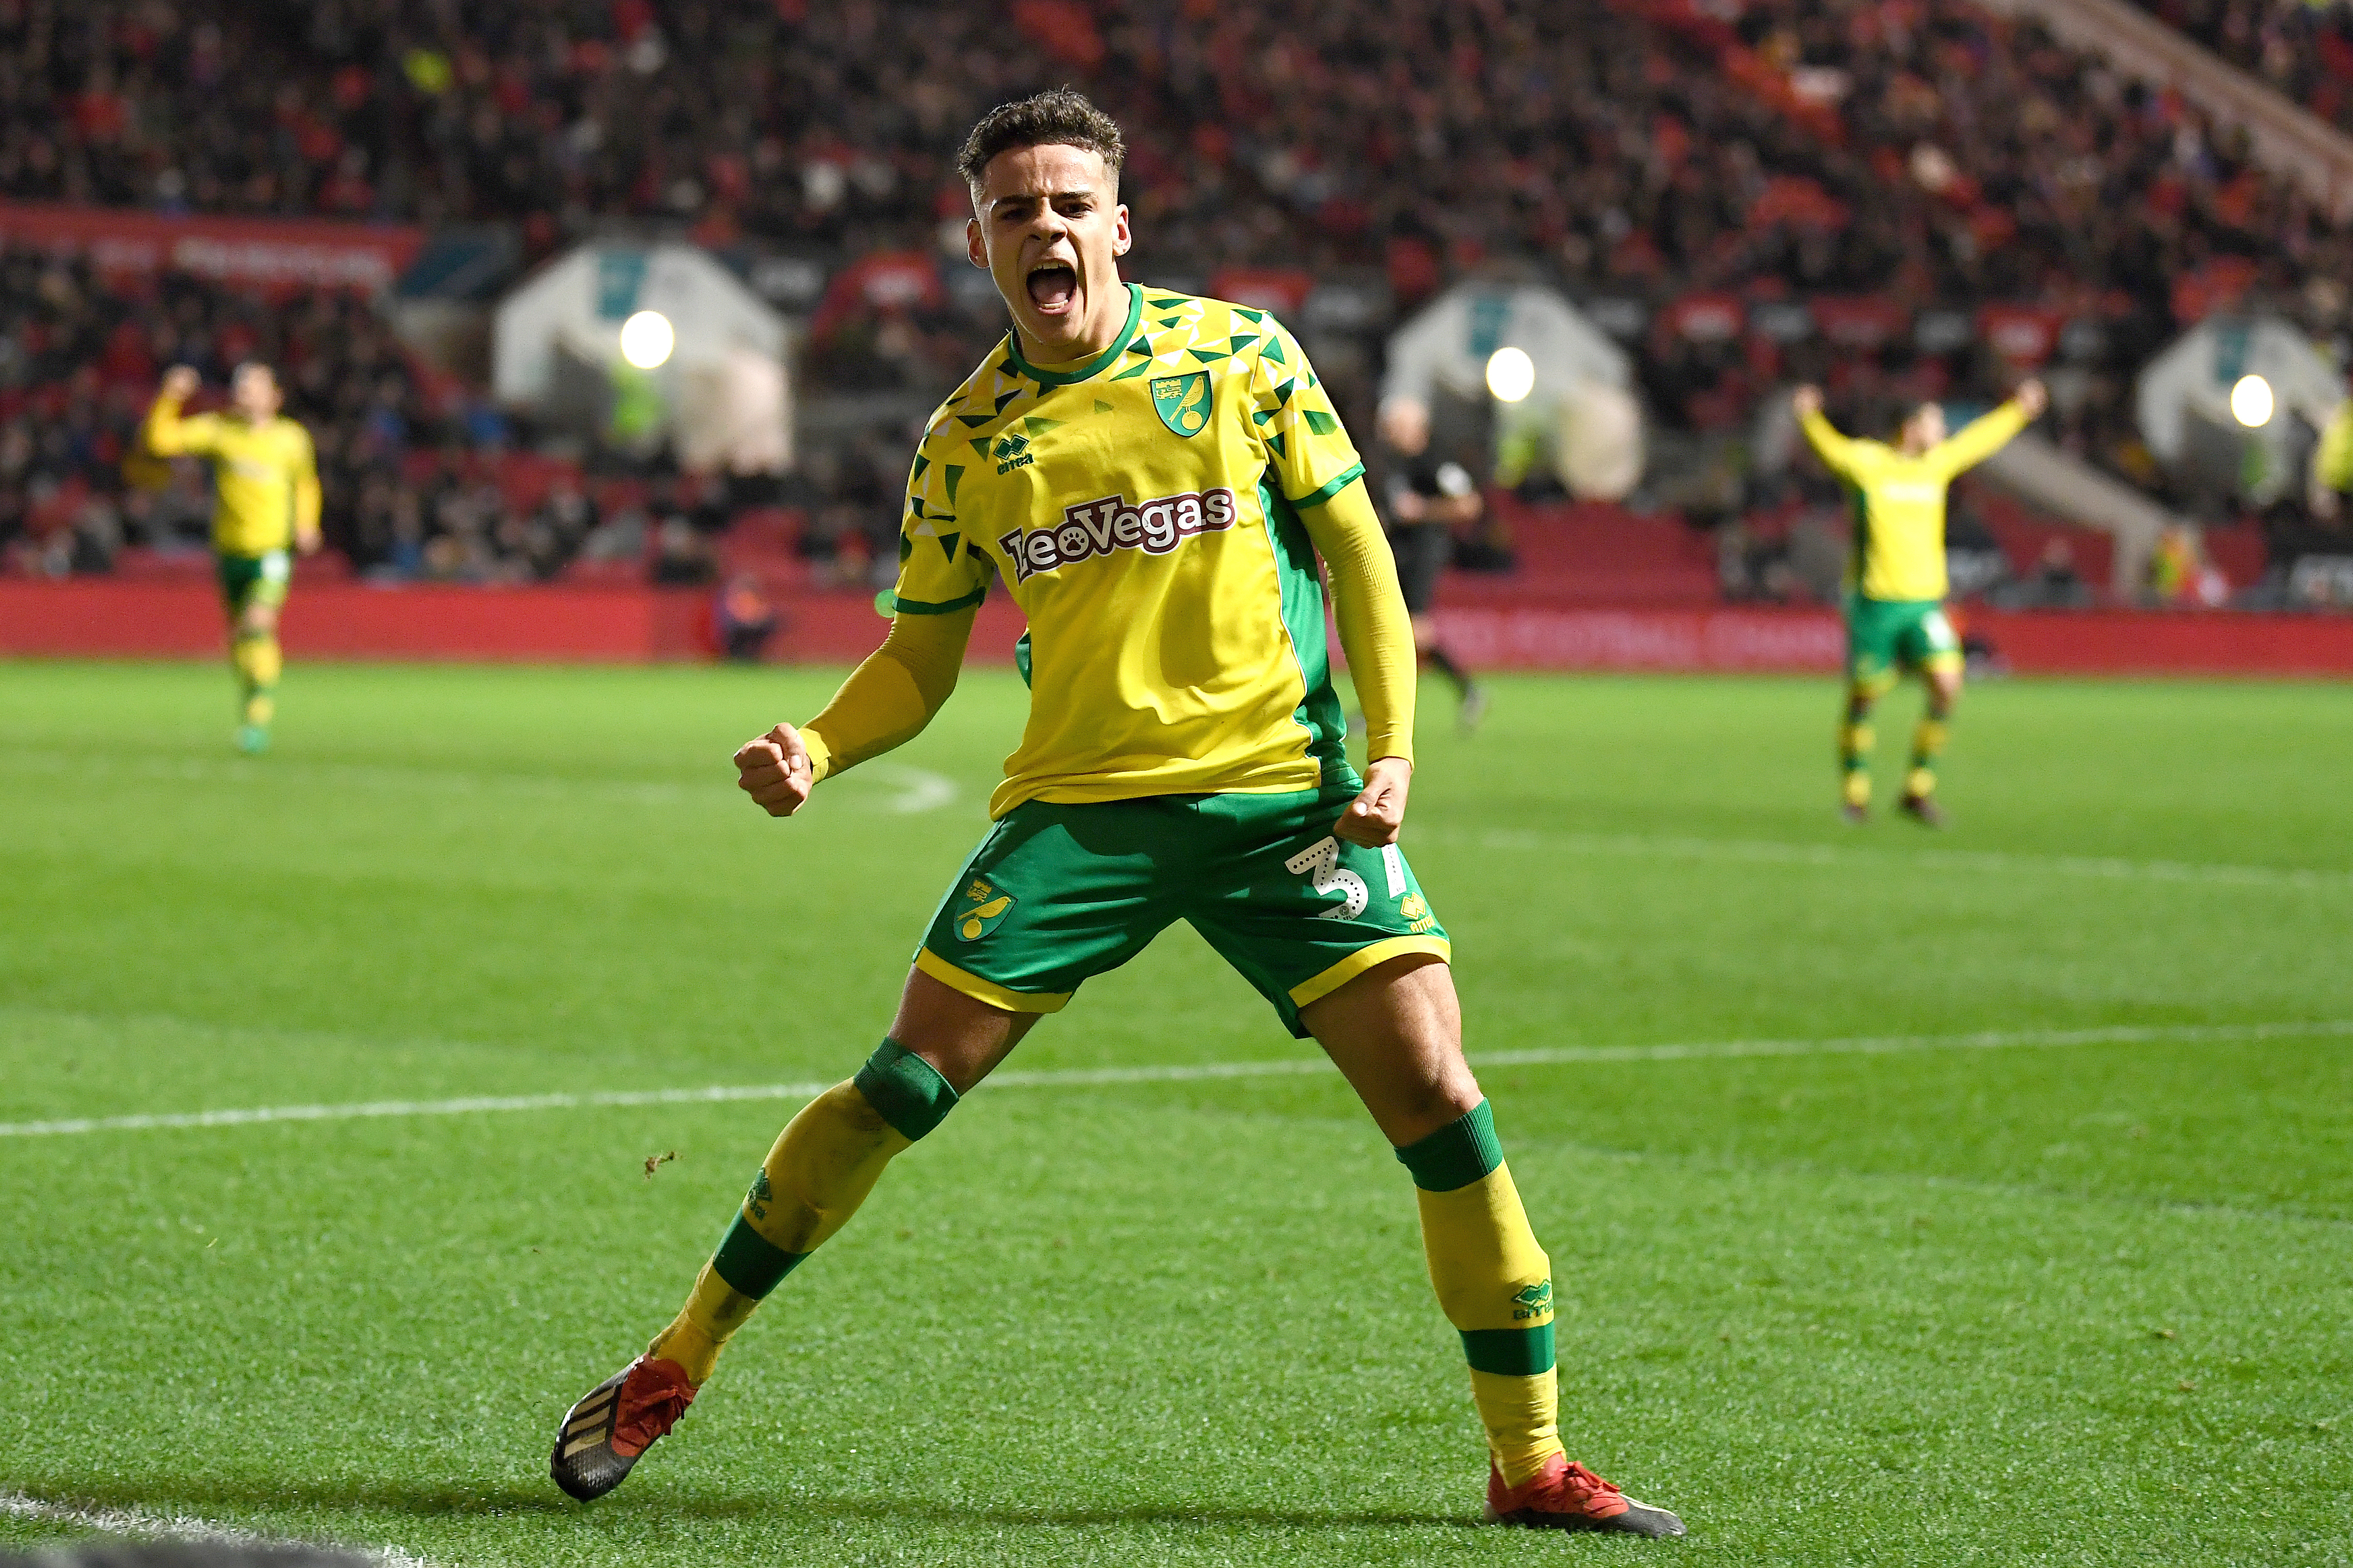 After a brilliant season in the Championship, Norwich star Max Aarons is drawing interest from Manchester United and Crystal Palace. (Picture Courtesy - AFP/Getty Images)